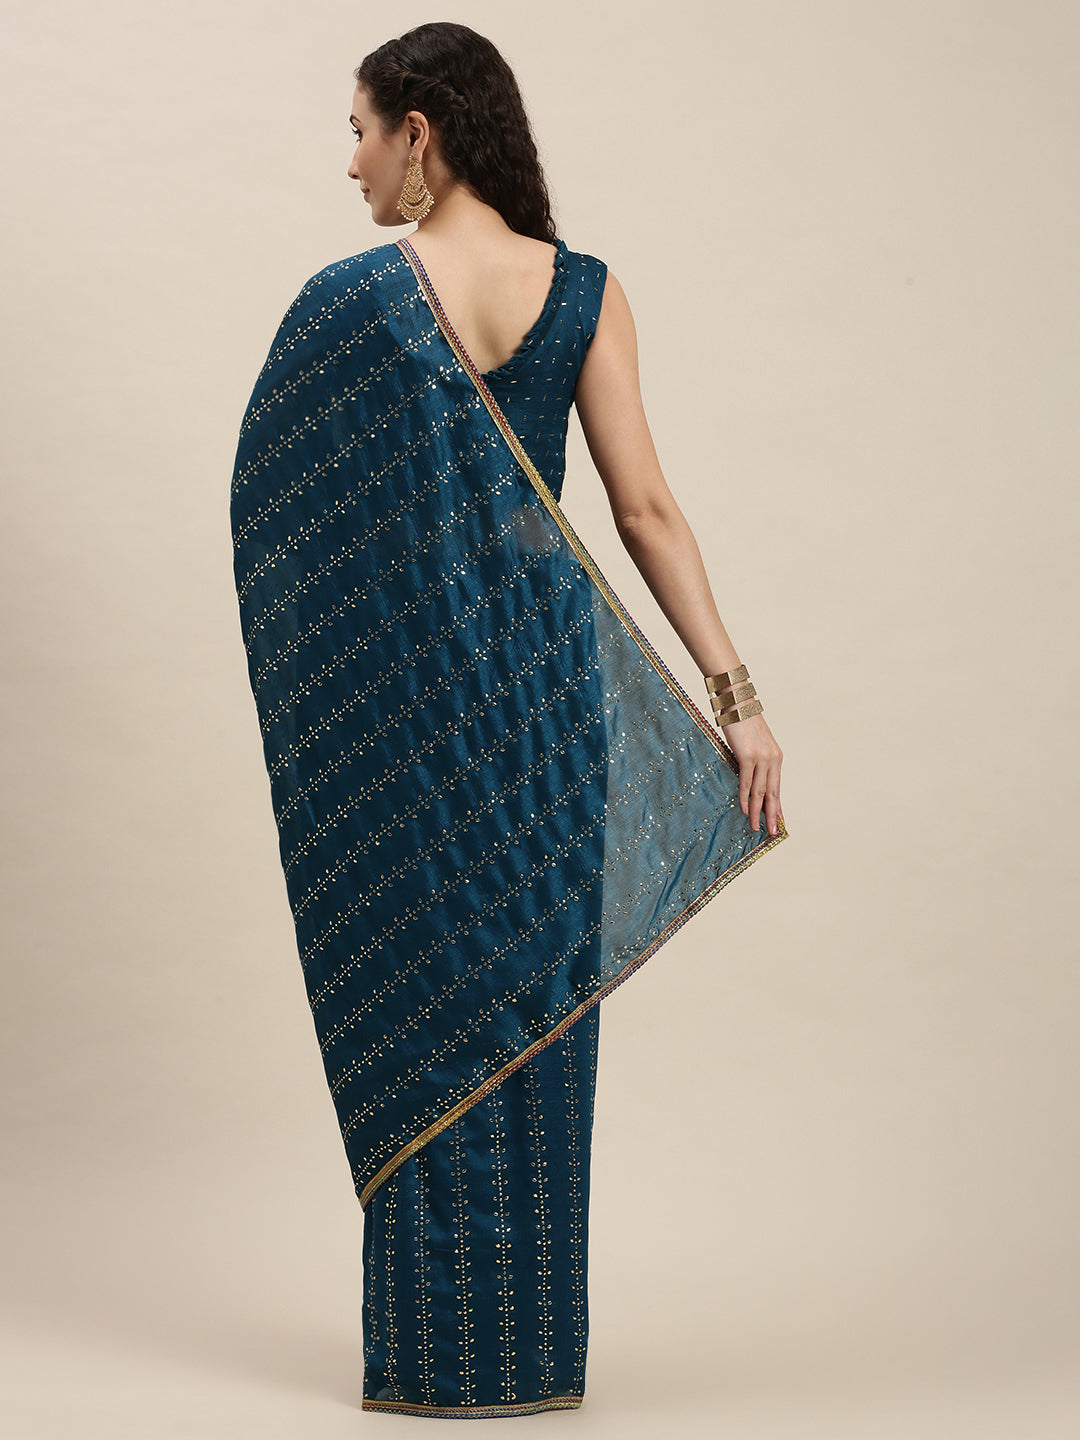 Exclusive Teal Blue Beads and Stones Work Saree